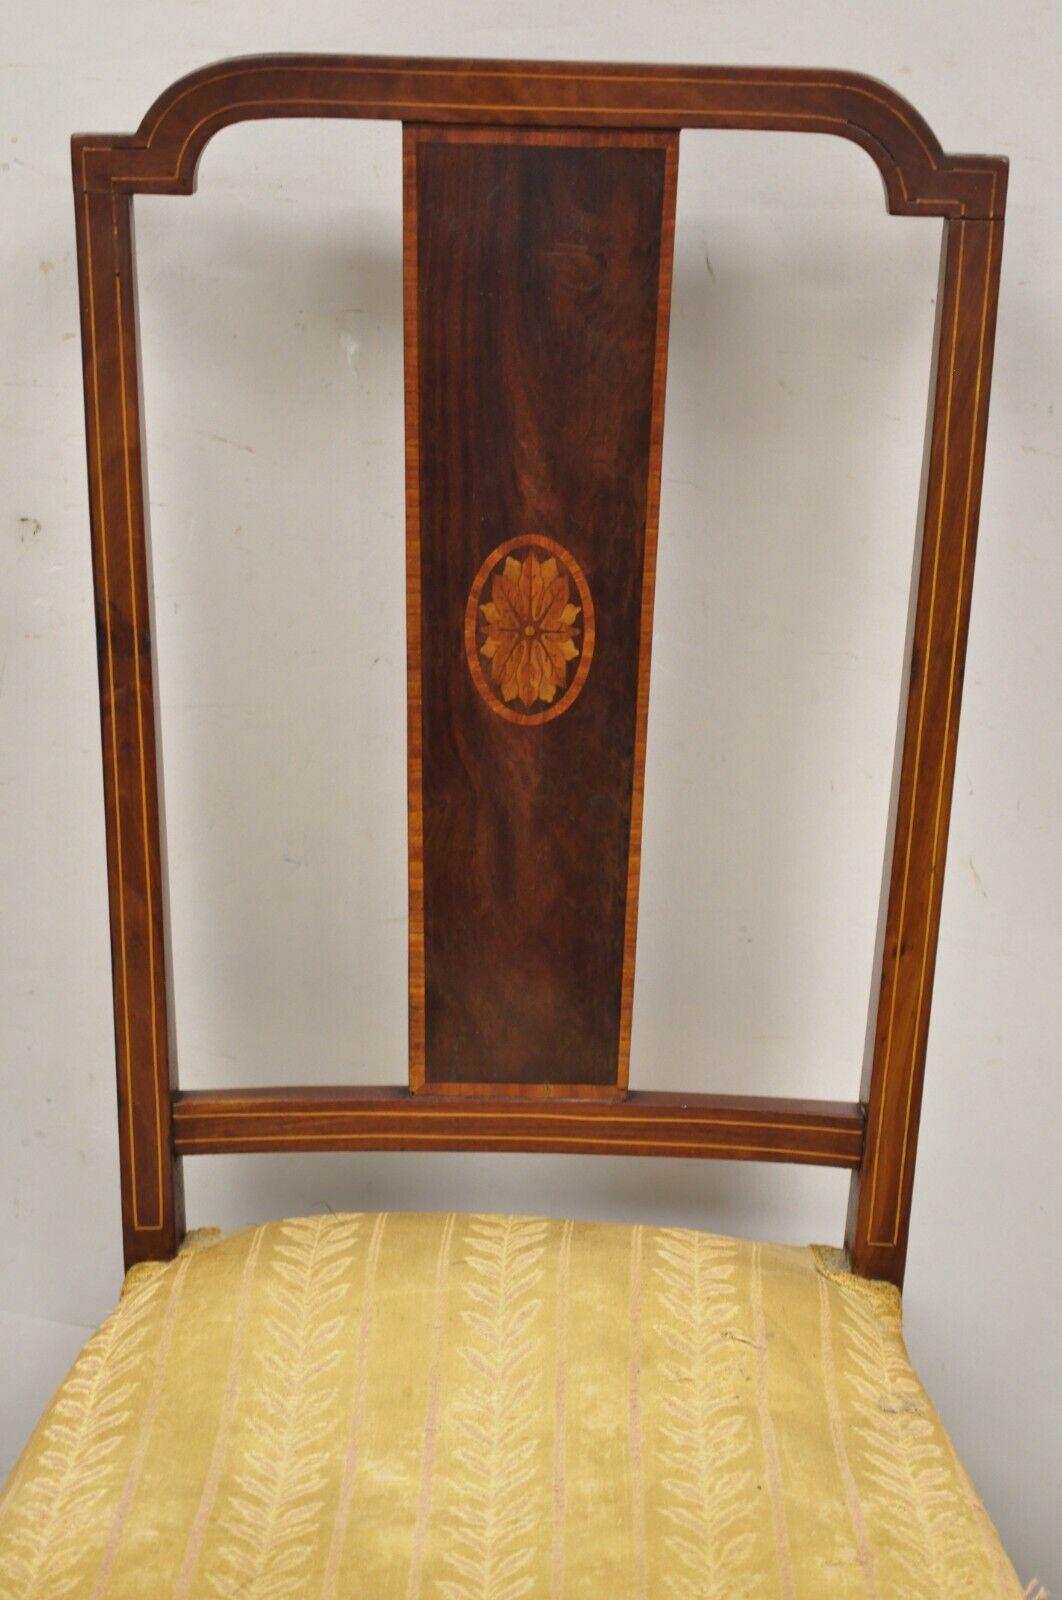 Antique Edwardian Mahogany Side Chair with Pencil and Pinwheel Inlay In Good Condition For Sale In Philadelphia, PA